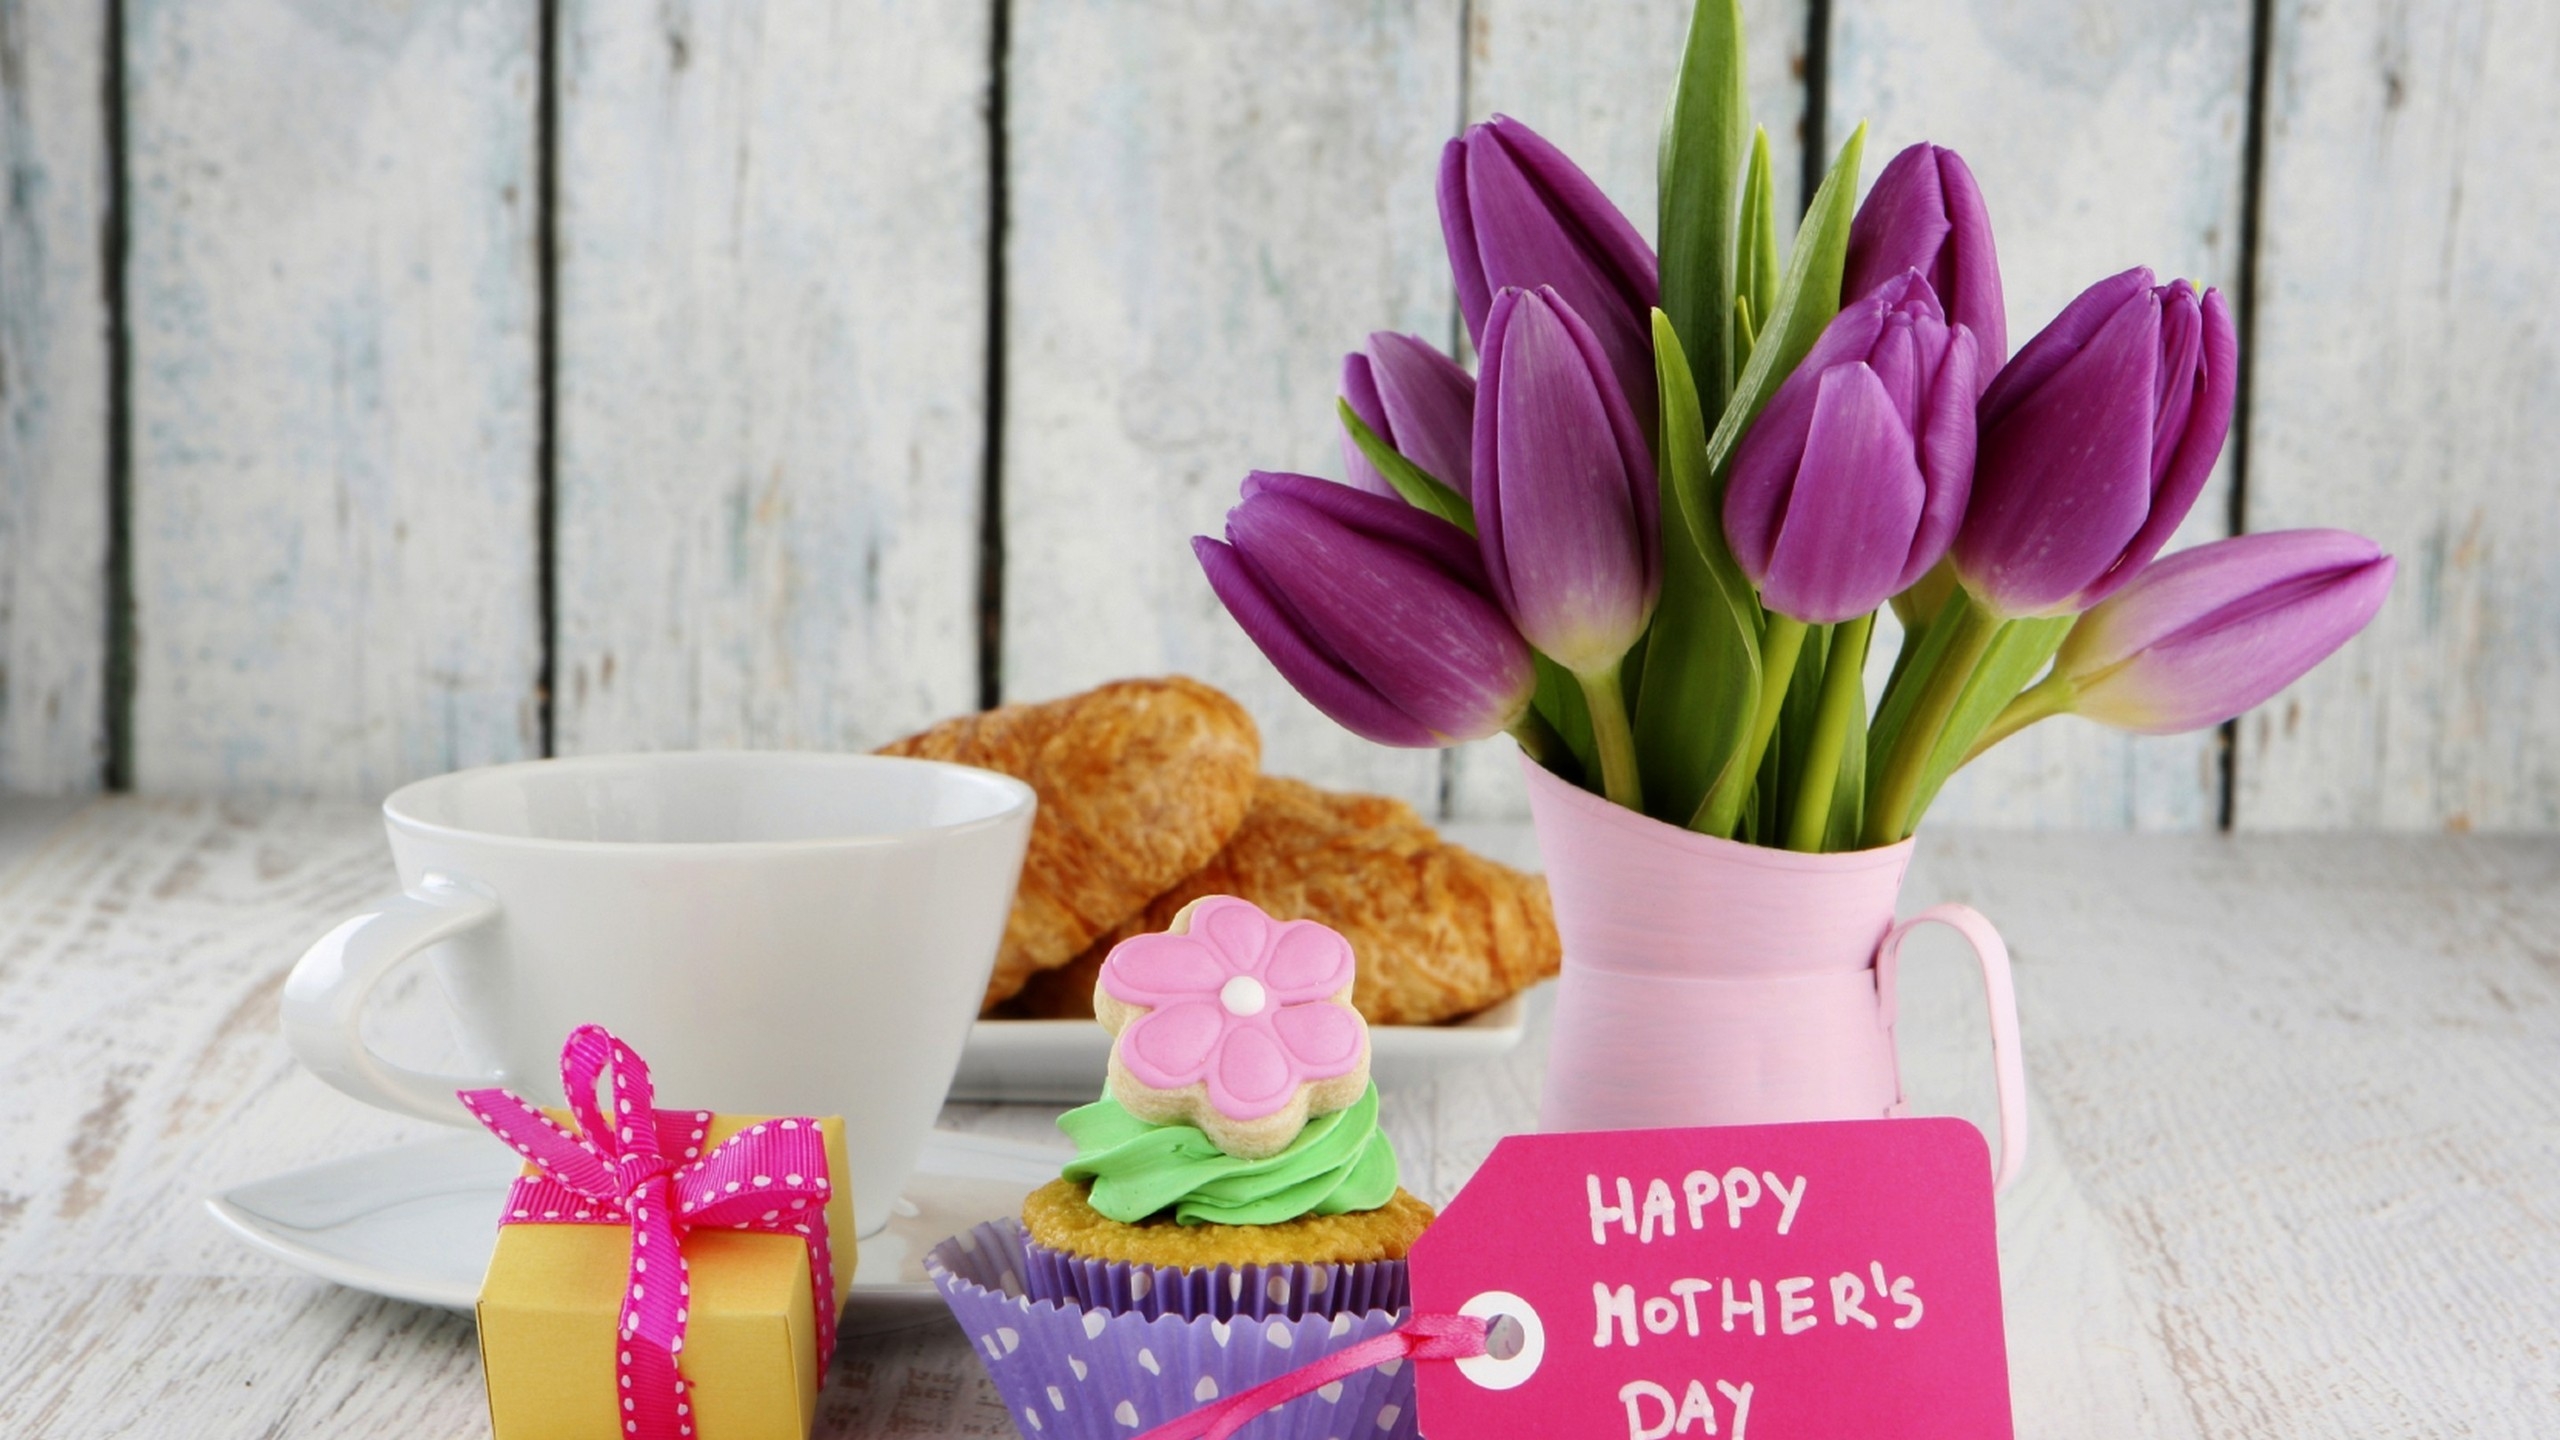 Mothers Day Gifts for 2560x1440 HDTV resolution